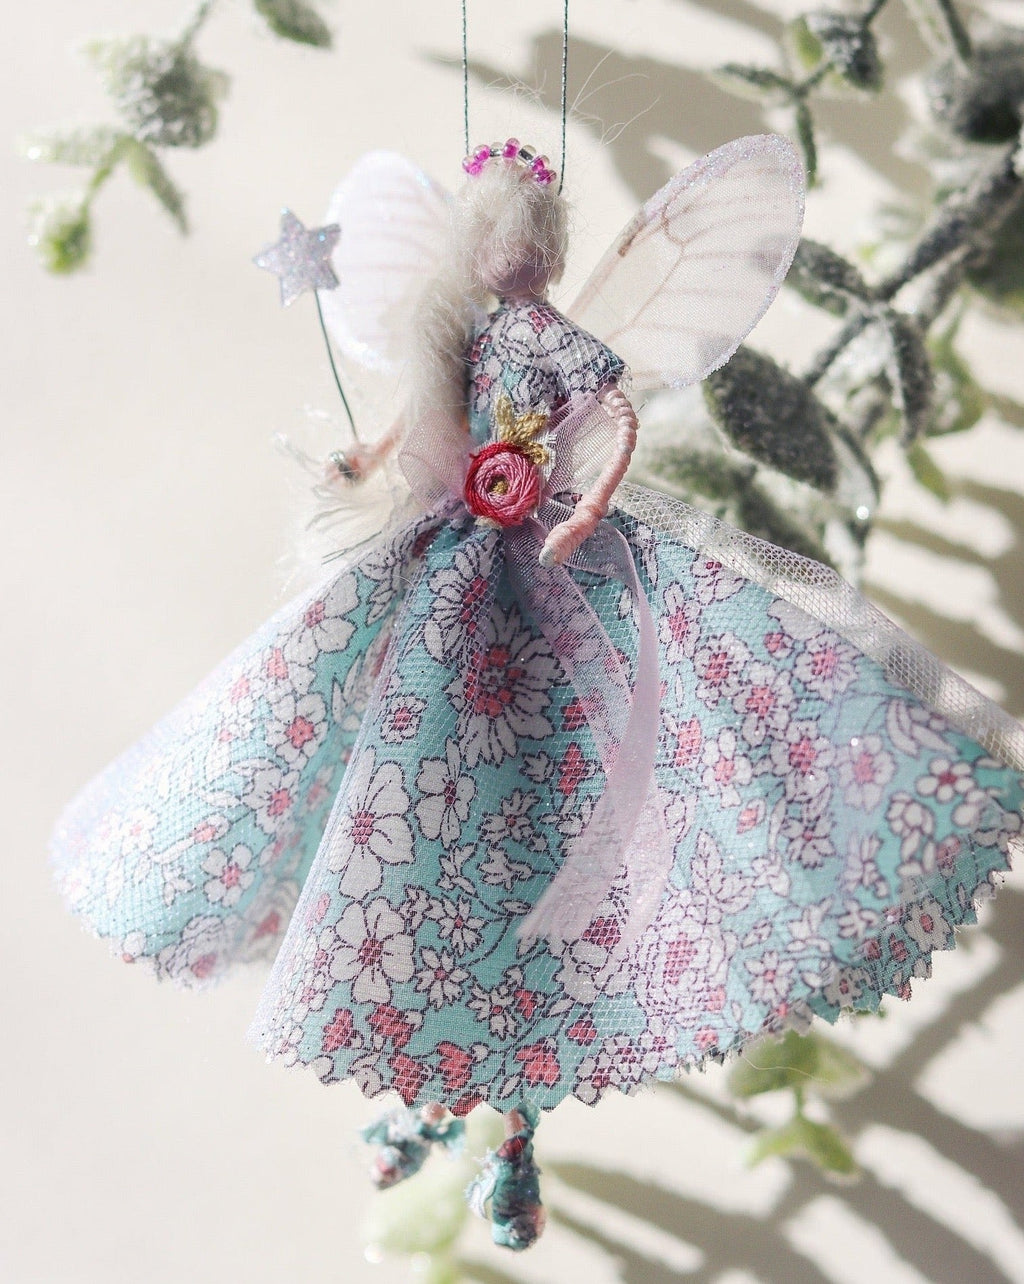 This Fairy is a unique, one-of-a-kind product, handmade by a bridal designer from all her cherished fabrics. It is an item to treasure, a special family heirloom. As each fairy is handmade and unique. This fairy wears a Liberty Print floral dress in blue and pink. The perfect addition to a nursery or gift for a loved one.